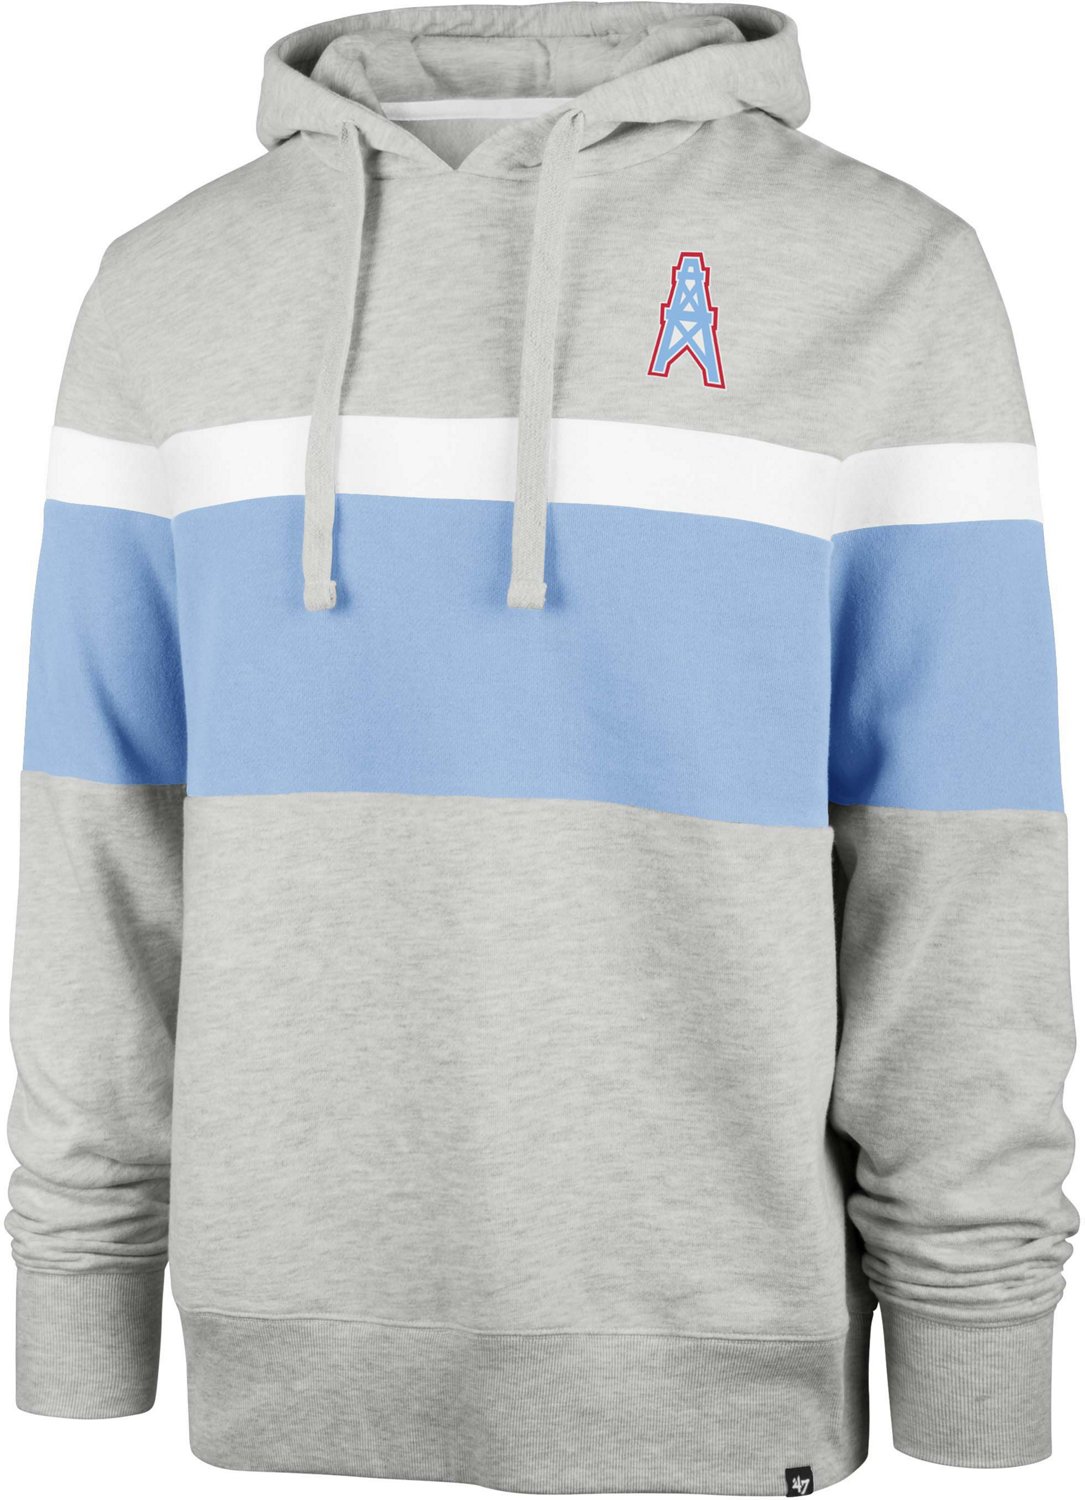 dodger, Shirts, New Houston Oilers Hoodie